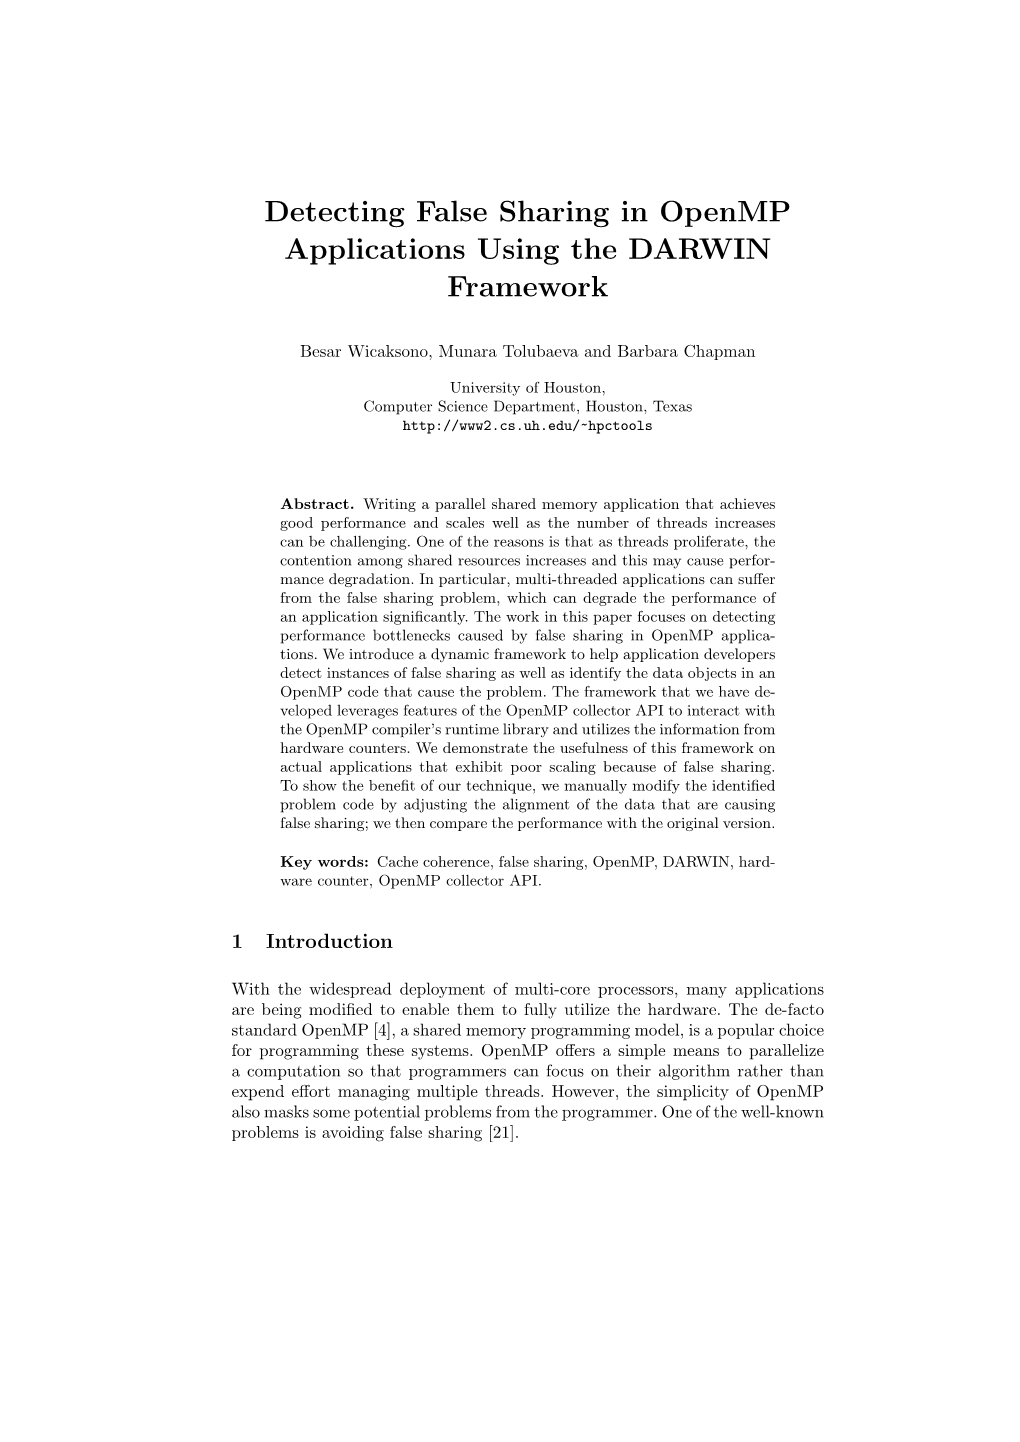 Detecting False Sharing in Openmp Applications Using the DARWIN Framework